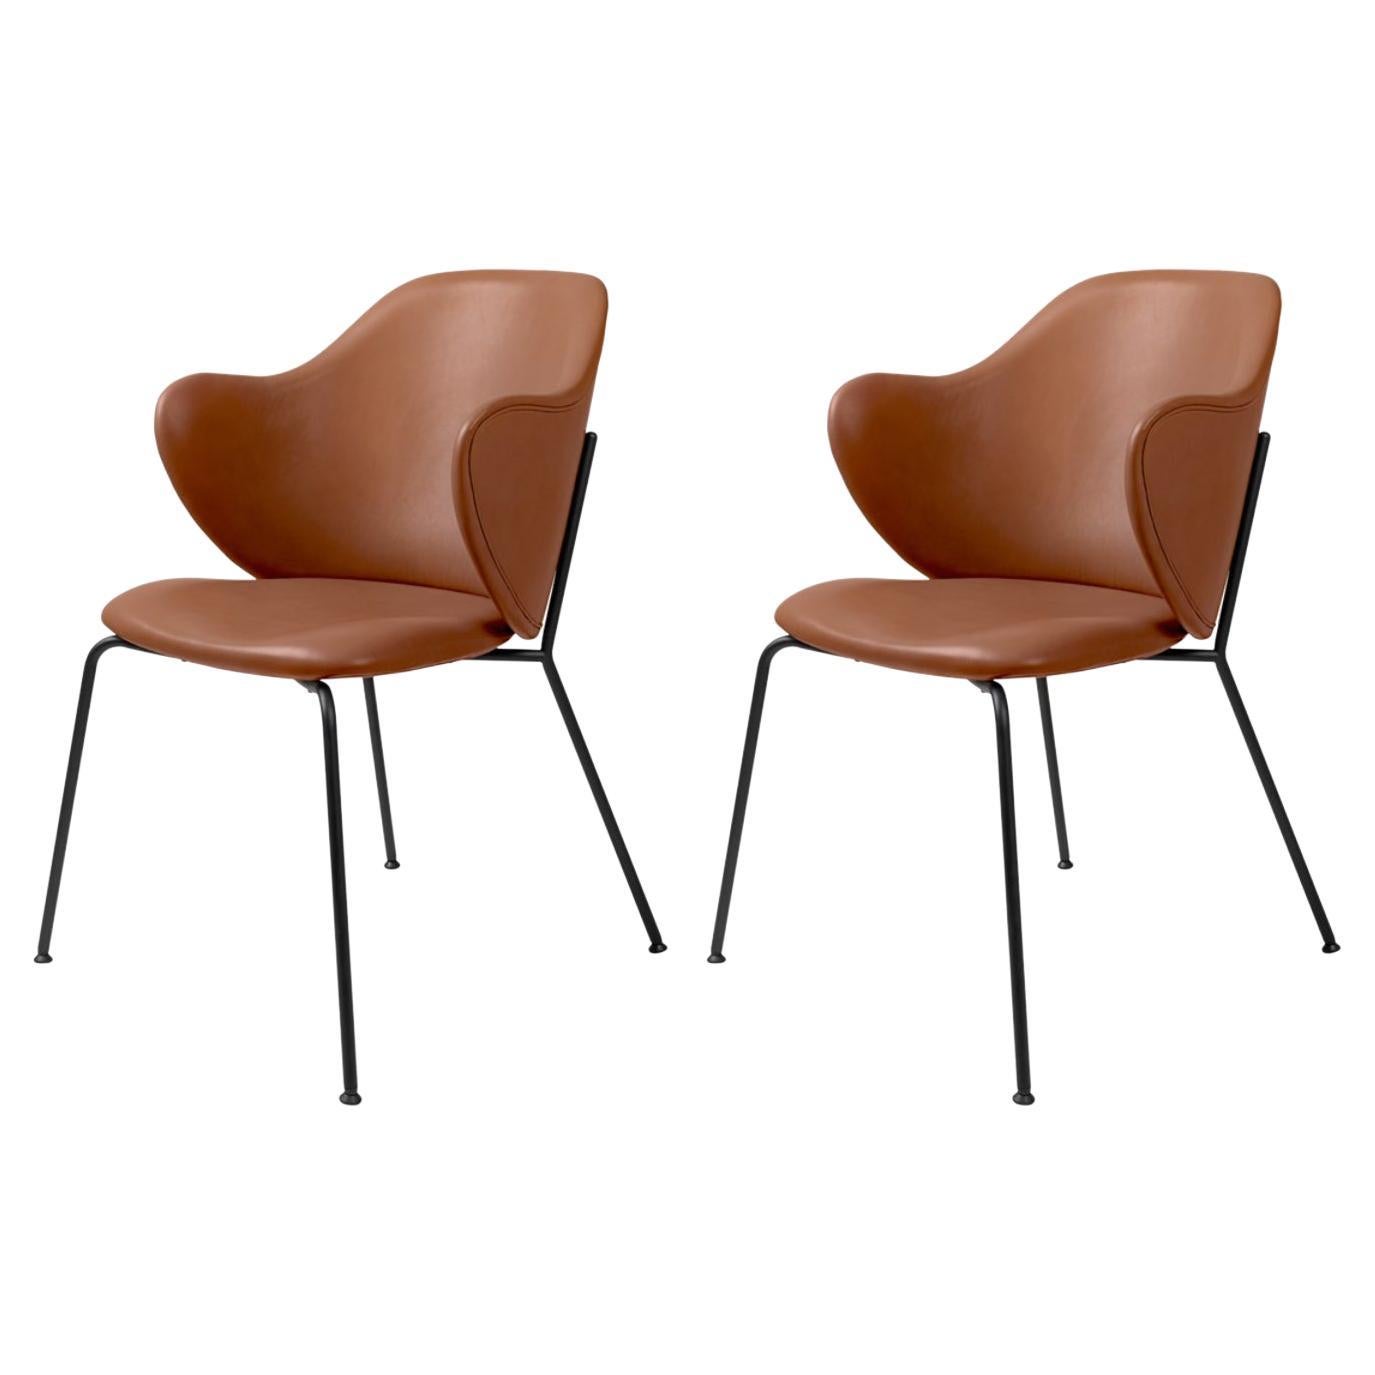 Set of 2 Brown Leather Lassen Chairs by Lassen For Sale